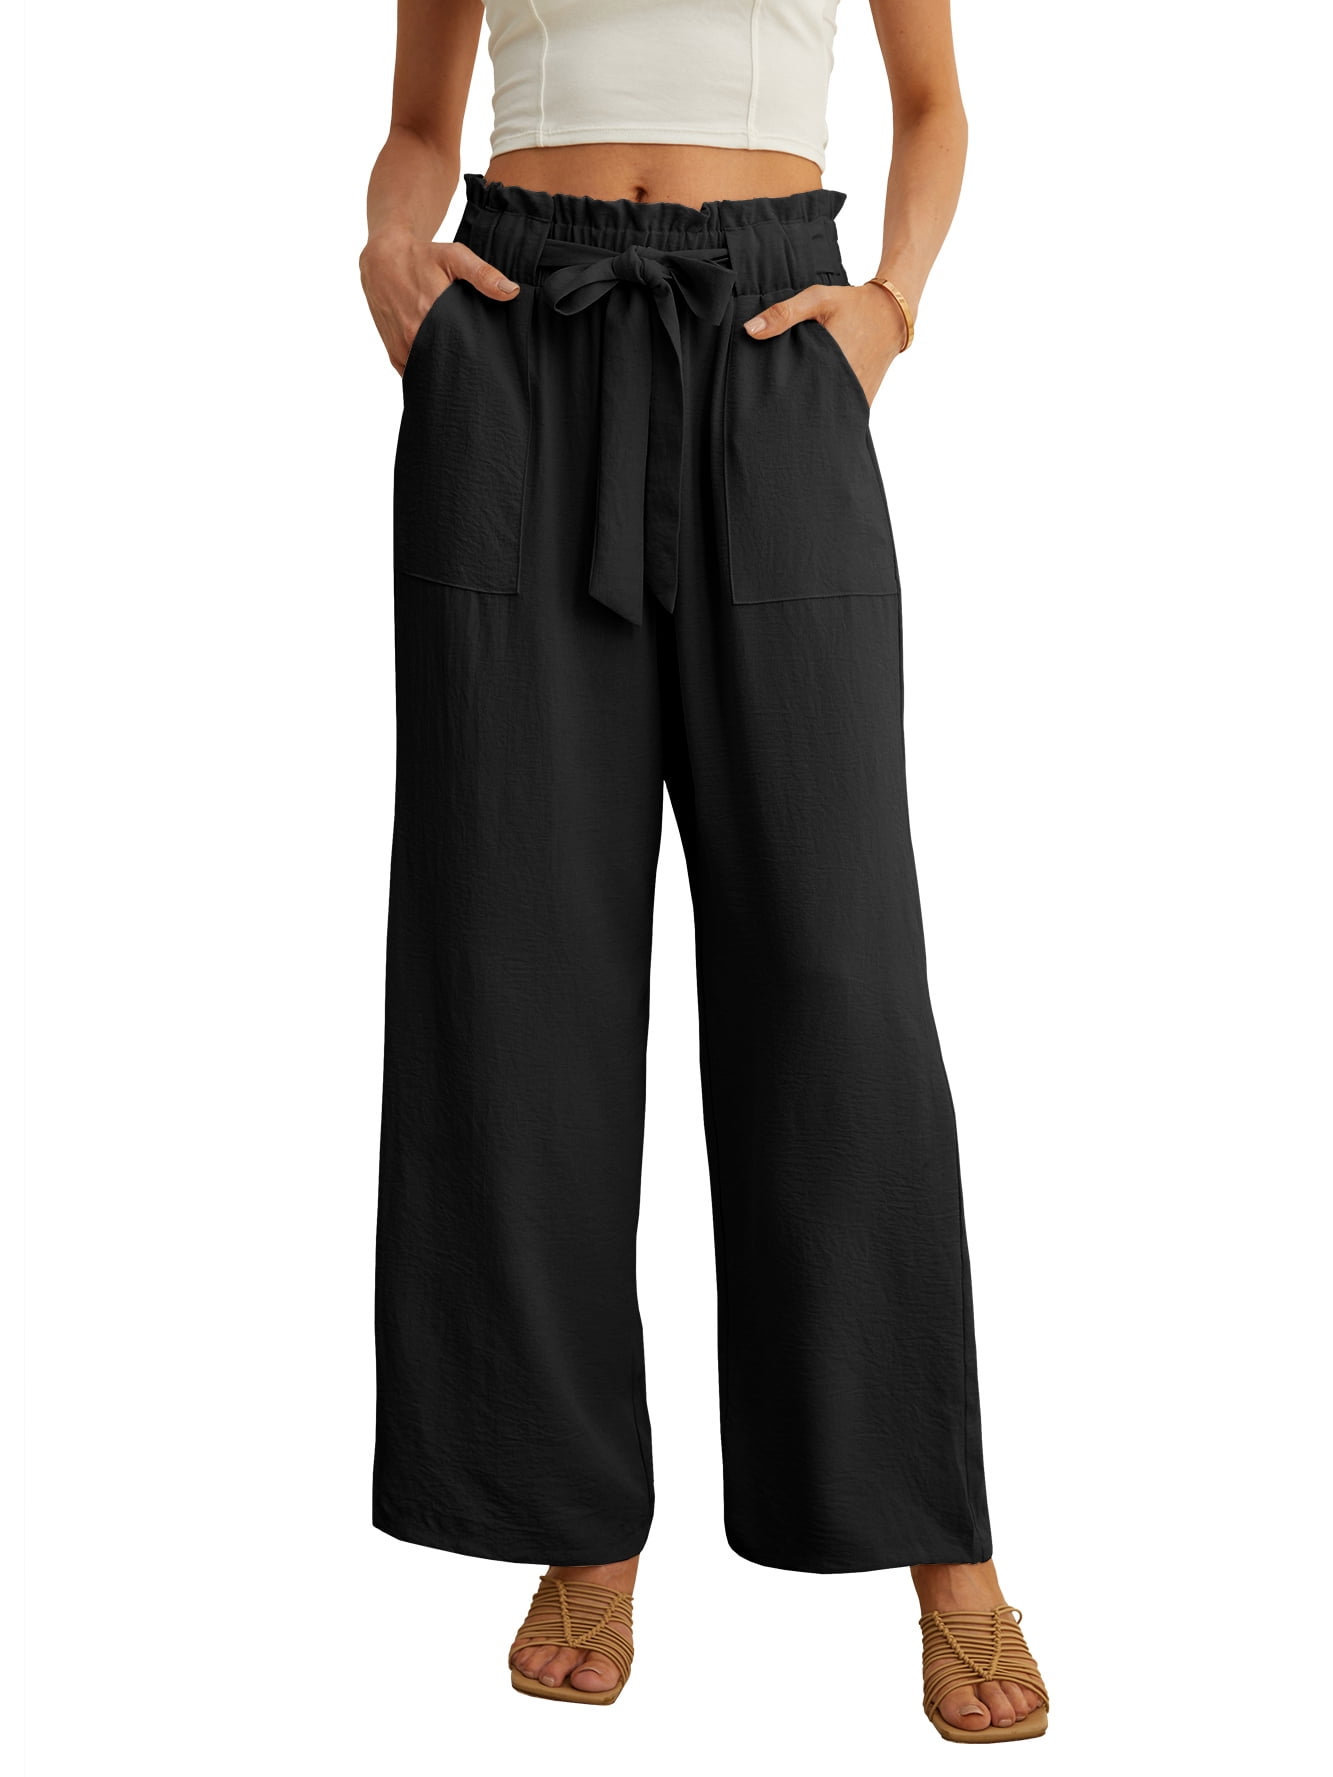 Chiclily Women's Wide Leg Pants with Pockets Lightweight High Waisted  Adjustable Tie Knot Loose Trousers Flowy Summer Beach Lounge Pants, US Size  Large in Dark Green 